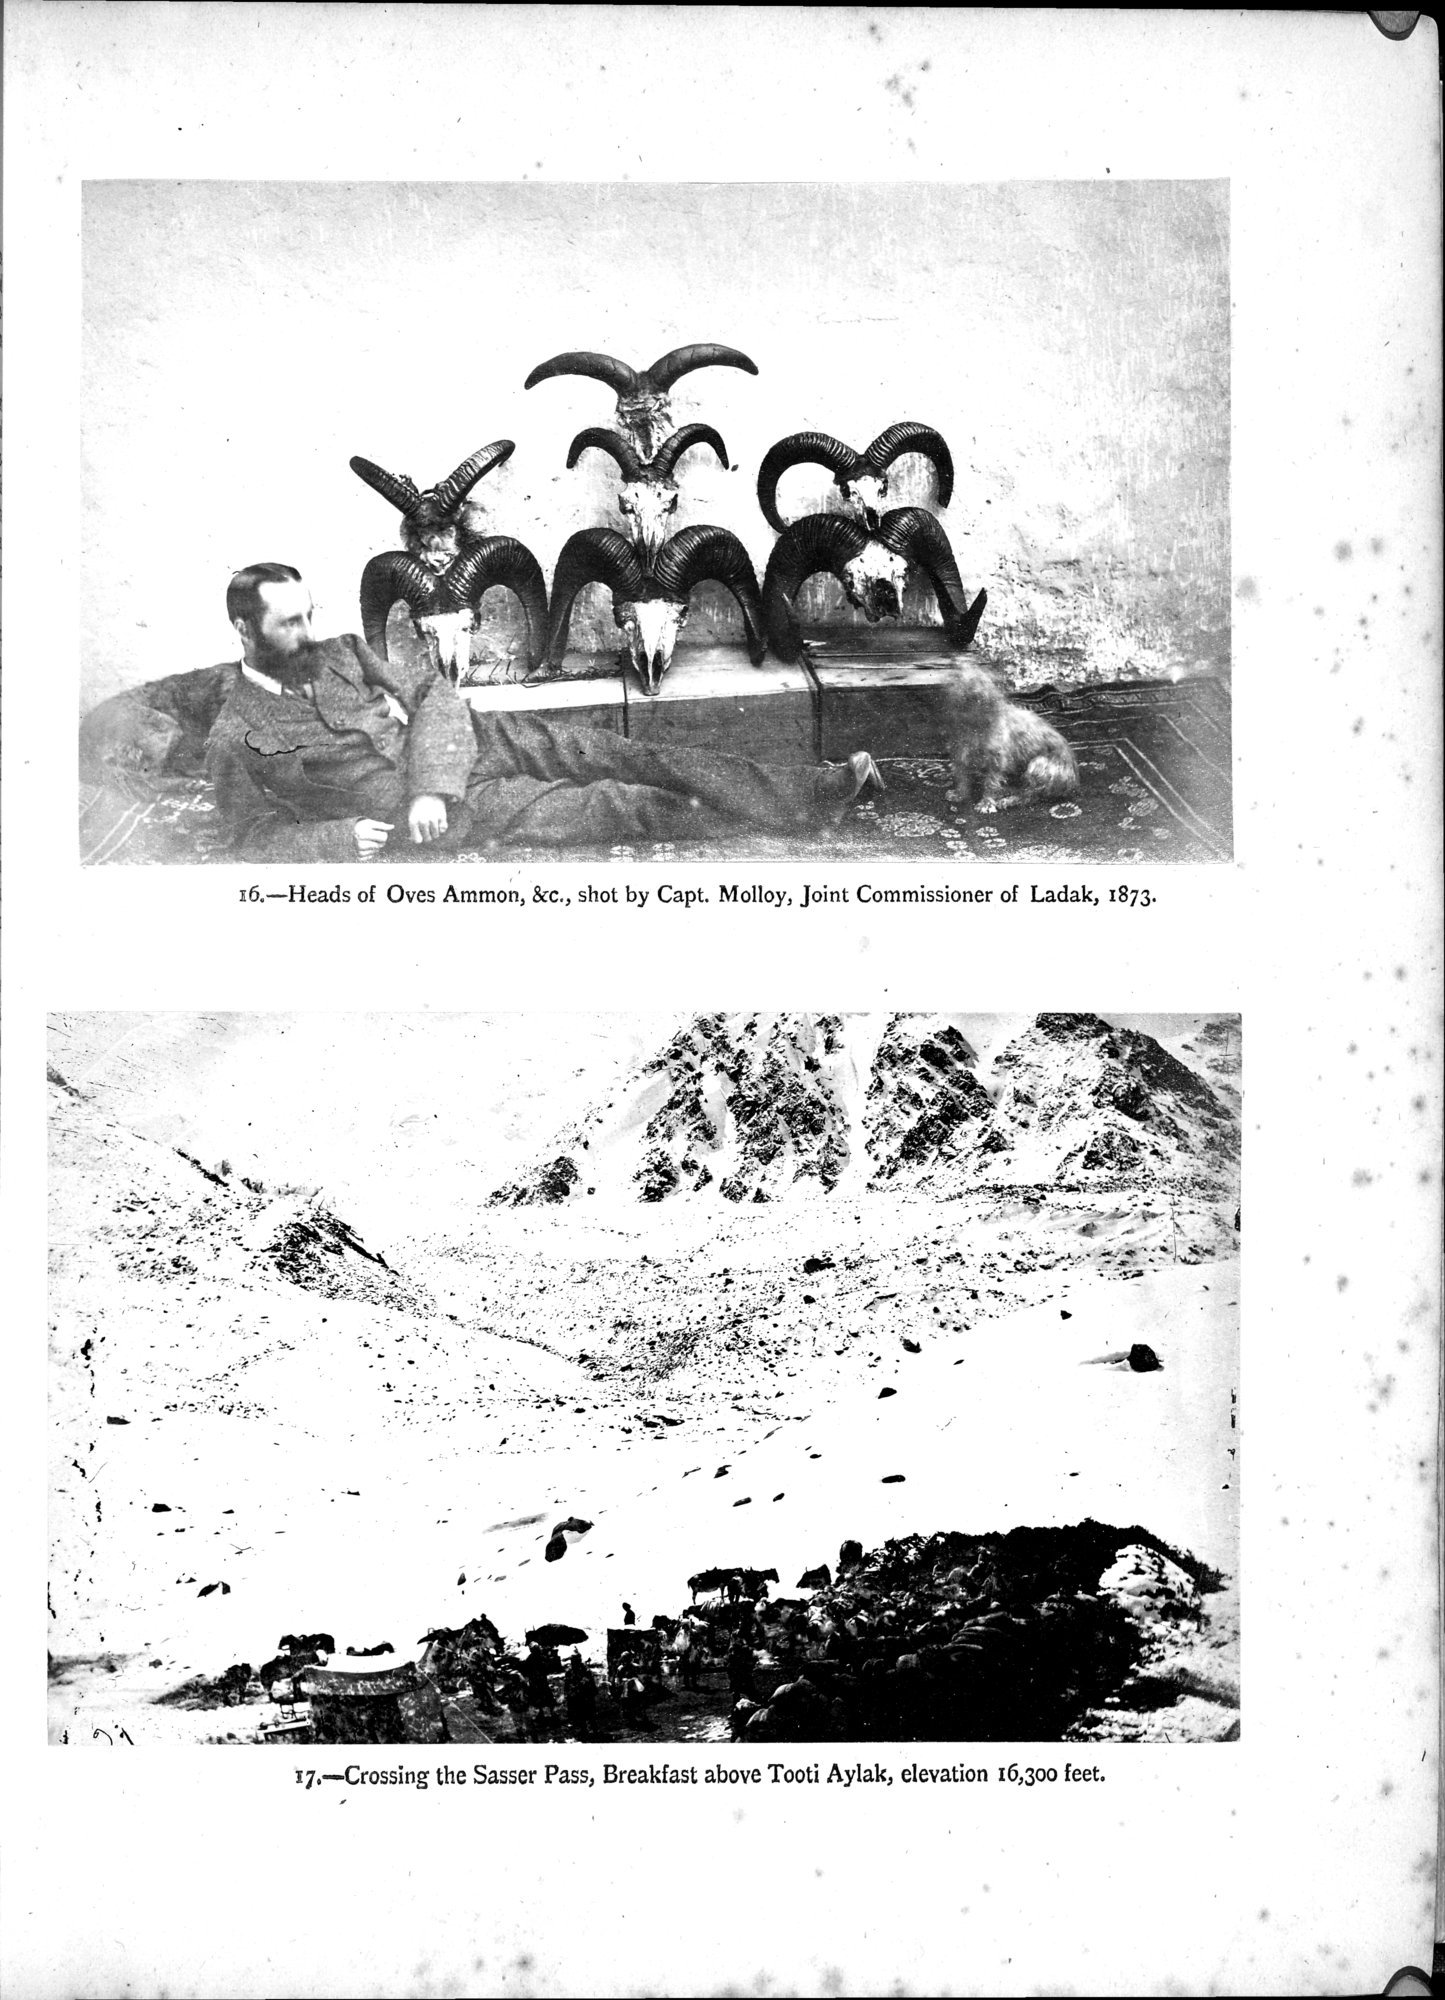 Report of a Mission to Yarkund in 1873 : vol.1 / 89 ページ（白黒高解像度画像）